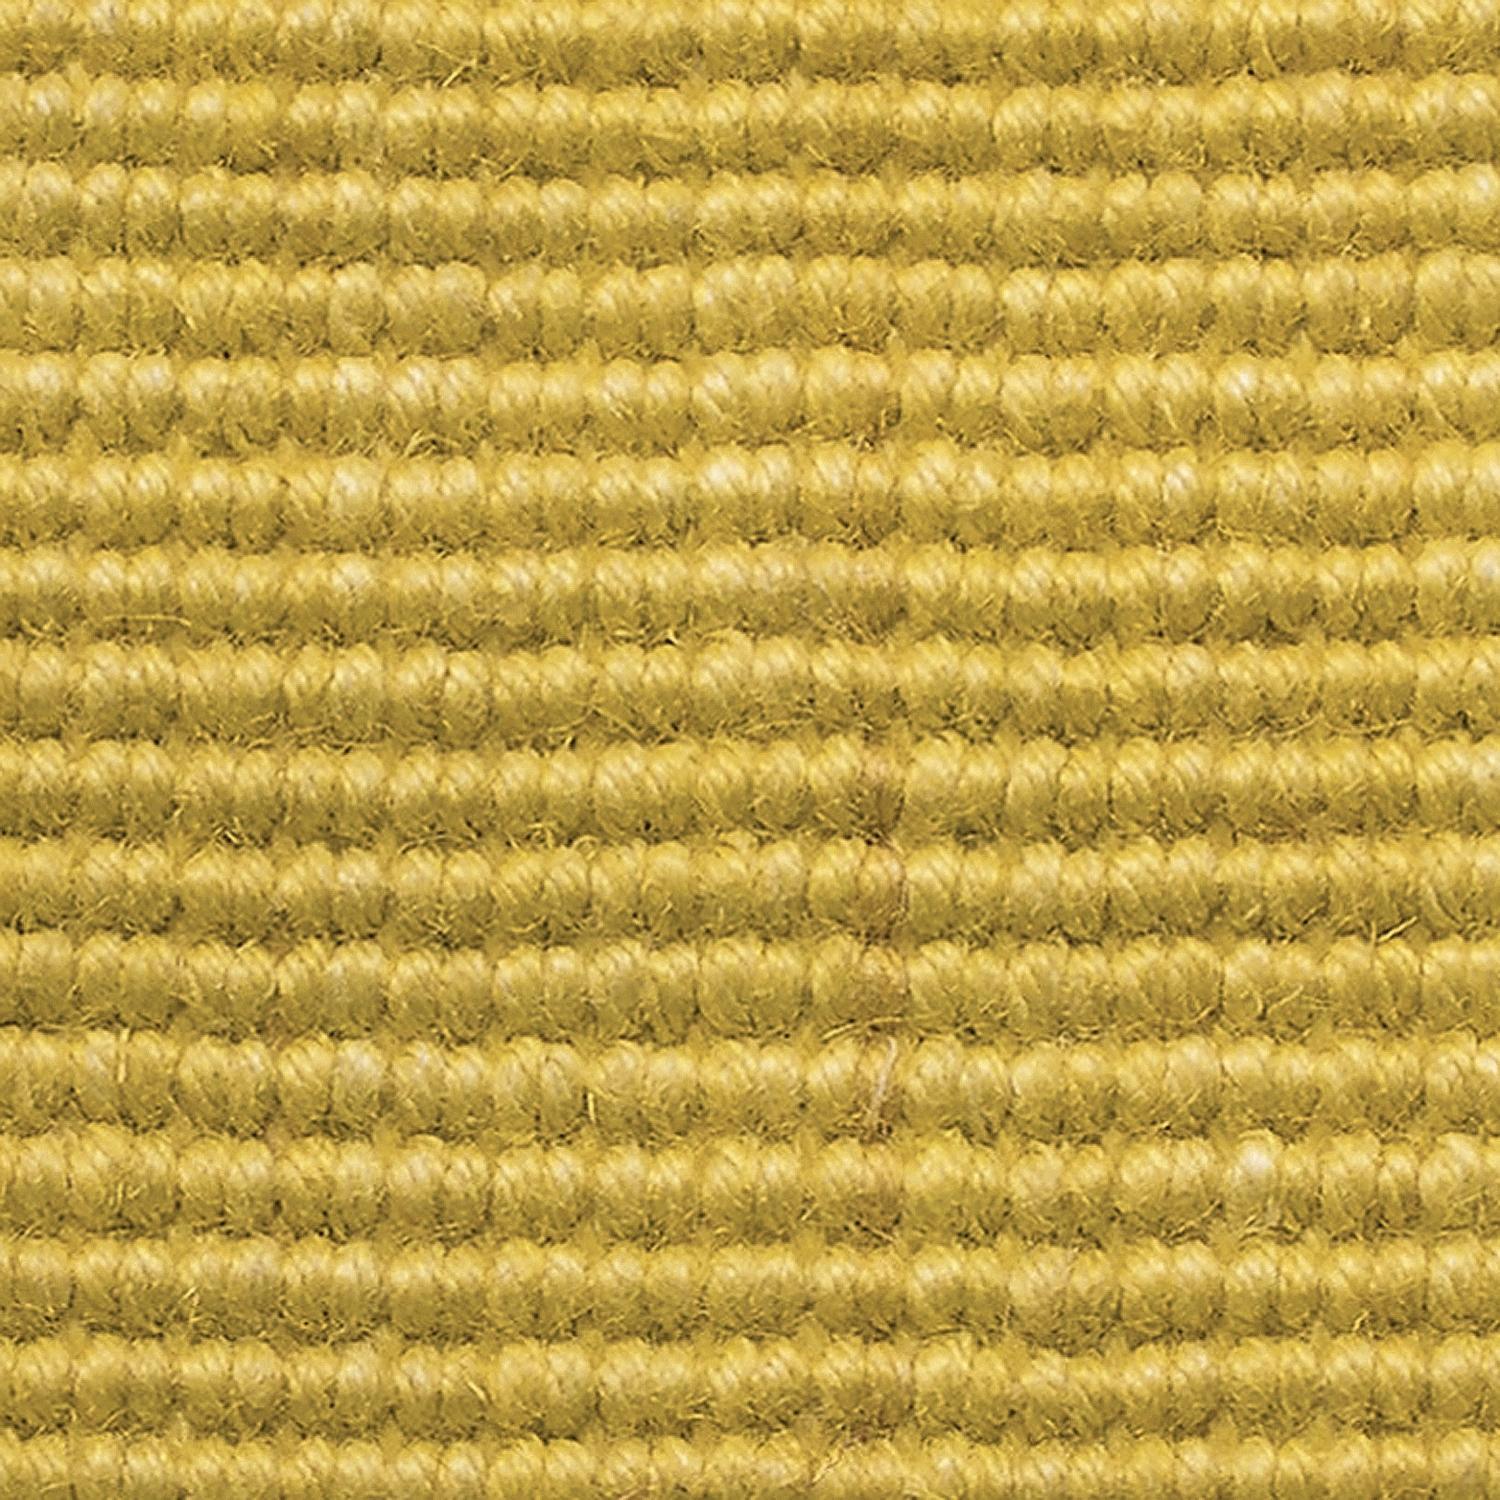 Indian 21st Cent Spring Yellow Natural Jute Rug by Deanna Comellini In Stock 180x250 cm For Sale